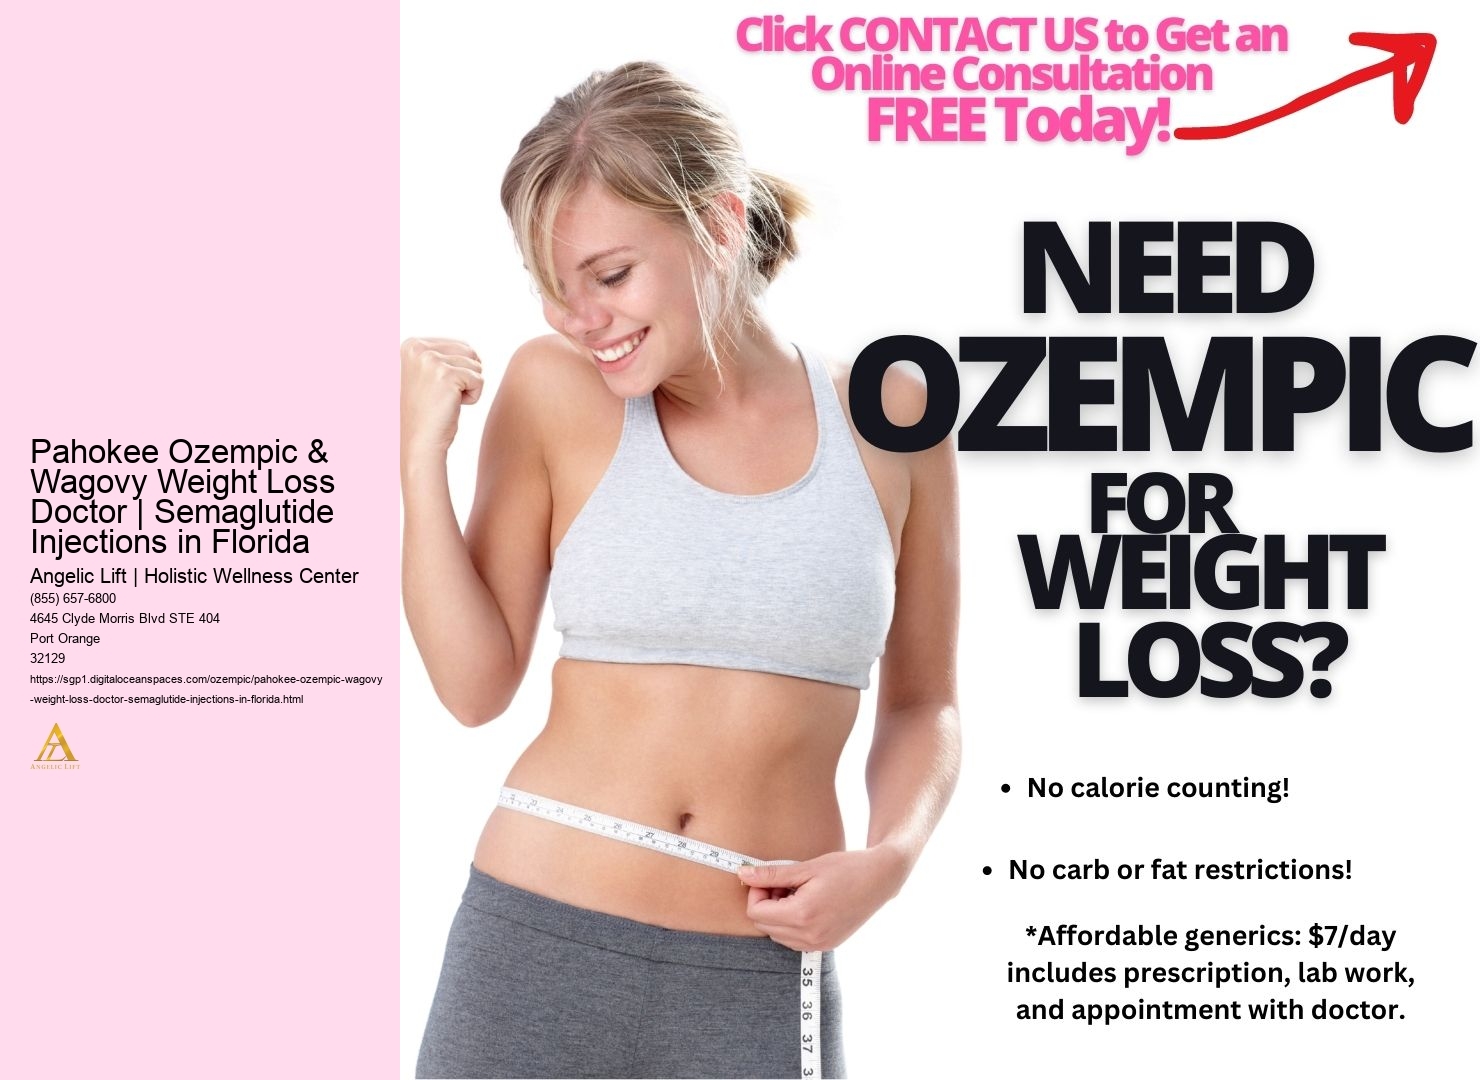 Pahokee Ozempic & Wagovy Weight Loss Doctor | Semaglutide Injections in Florida